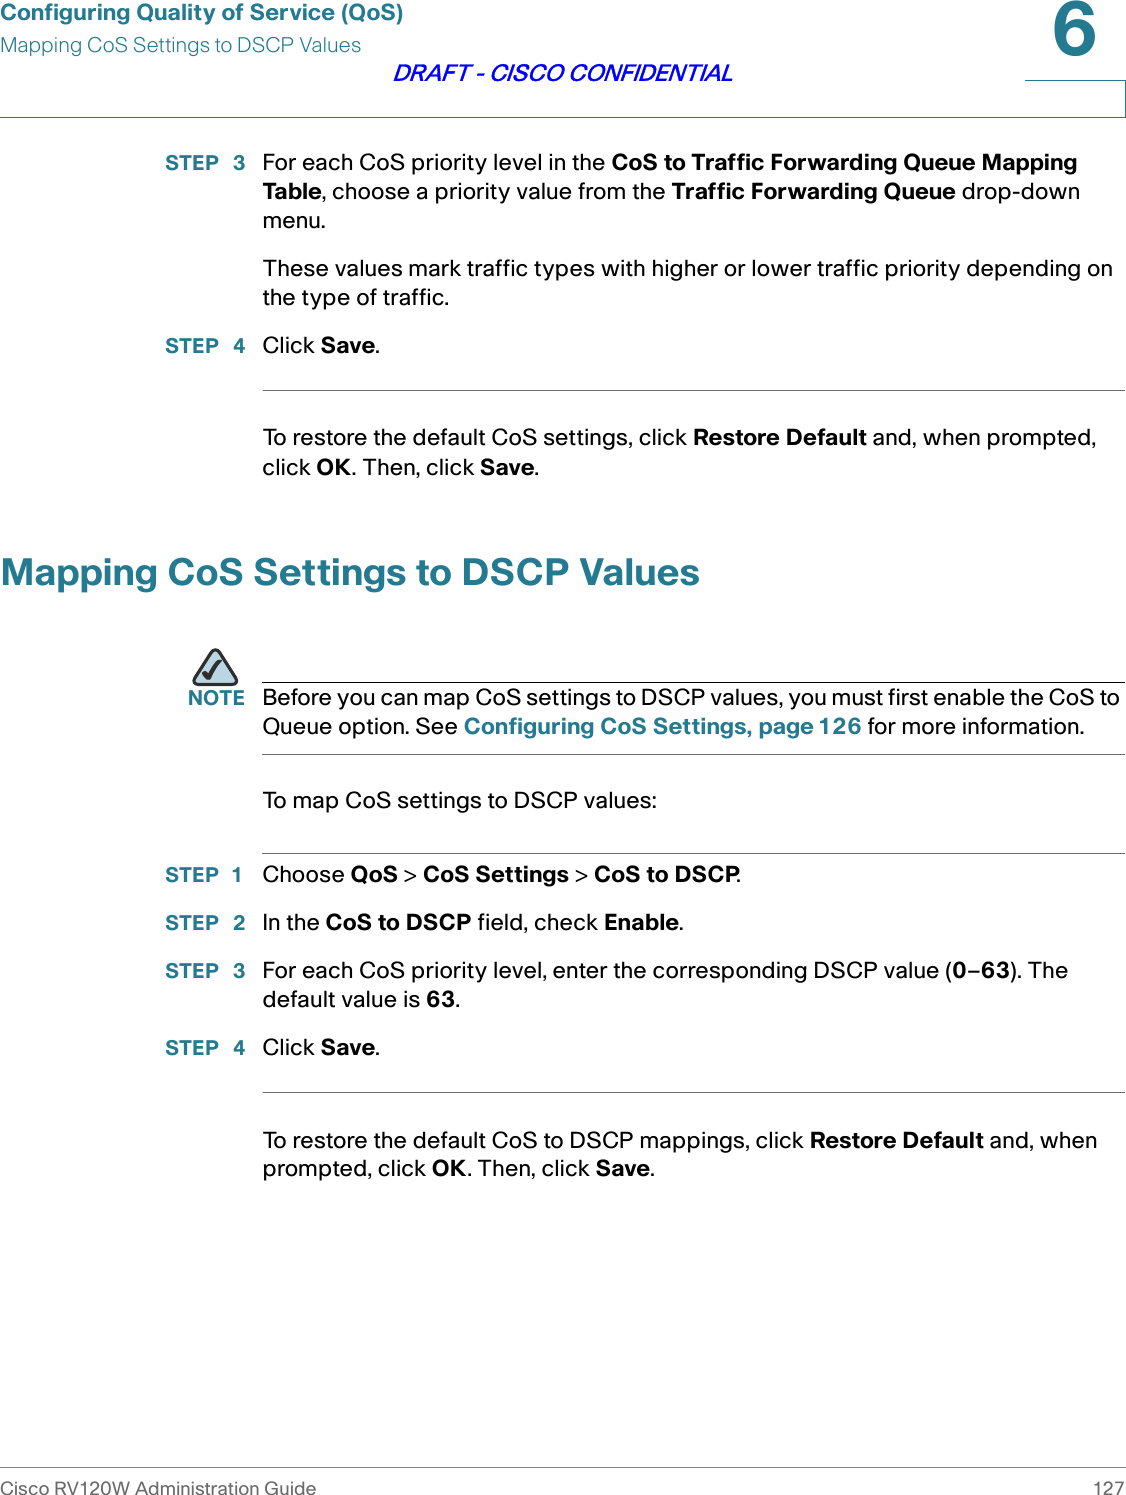 Configuring Quality of Service (QoS)Mapping CoS Settings to DSCP ValuesCisco RV120W Administration Guide 1276DRAFT - CISCO CONFIDENTIALSTEP  3 For each CoS priority level in the CoS to Traffic Forwarding Queue Mapping Table, choose a priority value from the Traffic Forwarding Queue drop-down menu.These values mark traffic types with higher or lower traffic priority depending on the type of traffic.STEP  4 Click Save.To restore the default CoS settings, click Restore Default and, when prompted, click OK. Then, click Save.Mapping CoS Settings to DSCP ValuesNOTE Before you can map CoS settings to DSCP values, you must first enable the CoS to Queue option. See Configuring CoS Settings, page 126 for more information.To map CoS settings to DSCP values:STEP 1 Choose QoS &gt; CoS Settings &gt; CoS to DSCP.STEP  2 In the CoS to DSCP field, check Enable.STEP  3 For each CoS priority level, enter the corresponding DSCP value (0–63). The default value is 63.STEP  4 Click Save.To restore the default CoS to DSCP mappings, click Restore Default and, when prompted, click OK. Then, click Save.